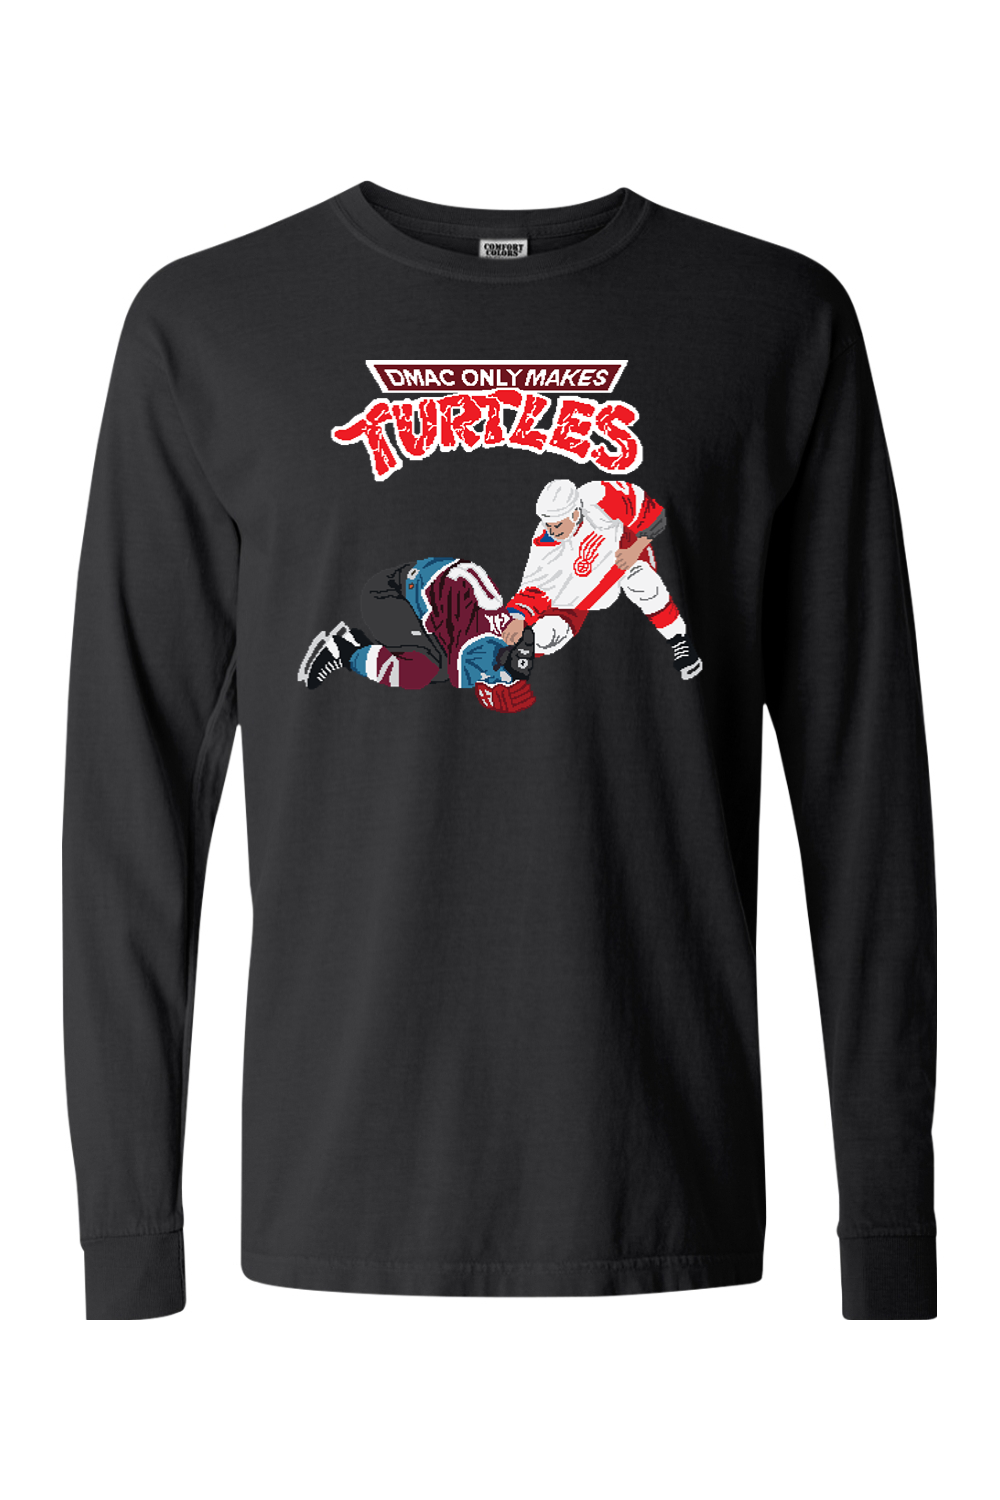 D-Mac Only Makes Turtles Long Sleeve T-Shirt